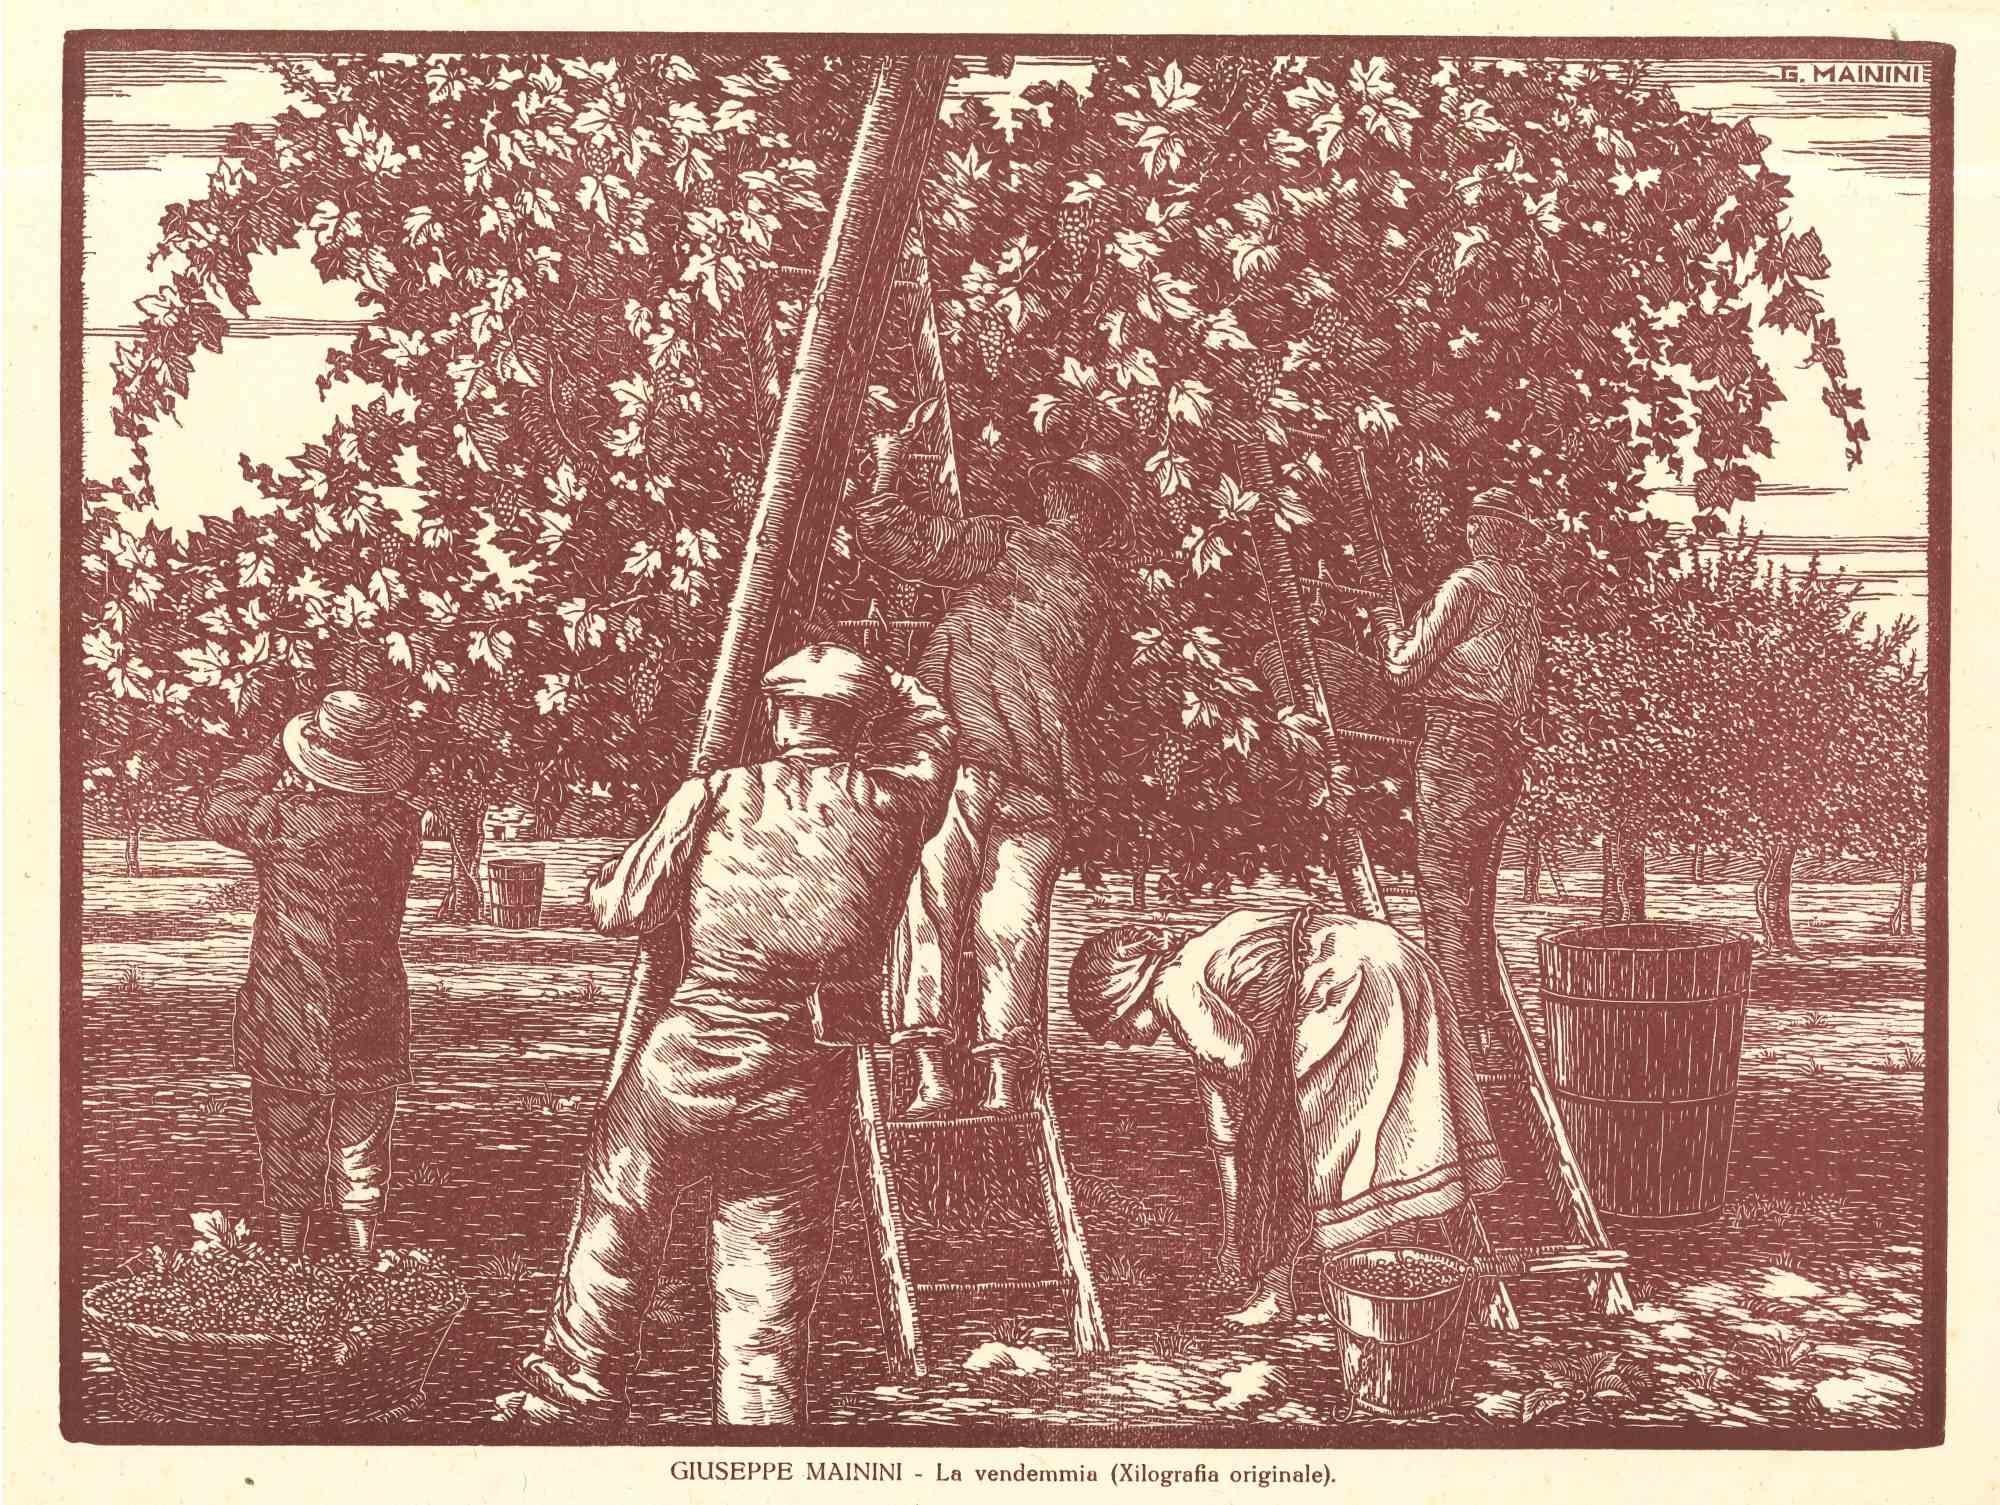 La Vendemmia is an original woodcut print by Giuseppe Mainini in the early 20th century.

The artwork depicts a harvest scene in garnet red colors.

Good conditions.
